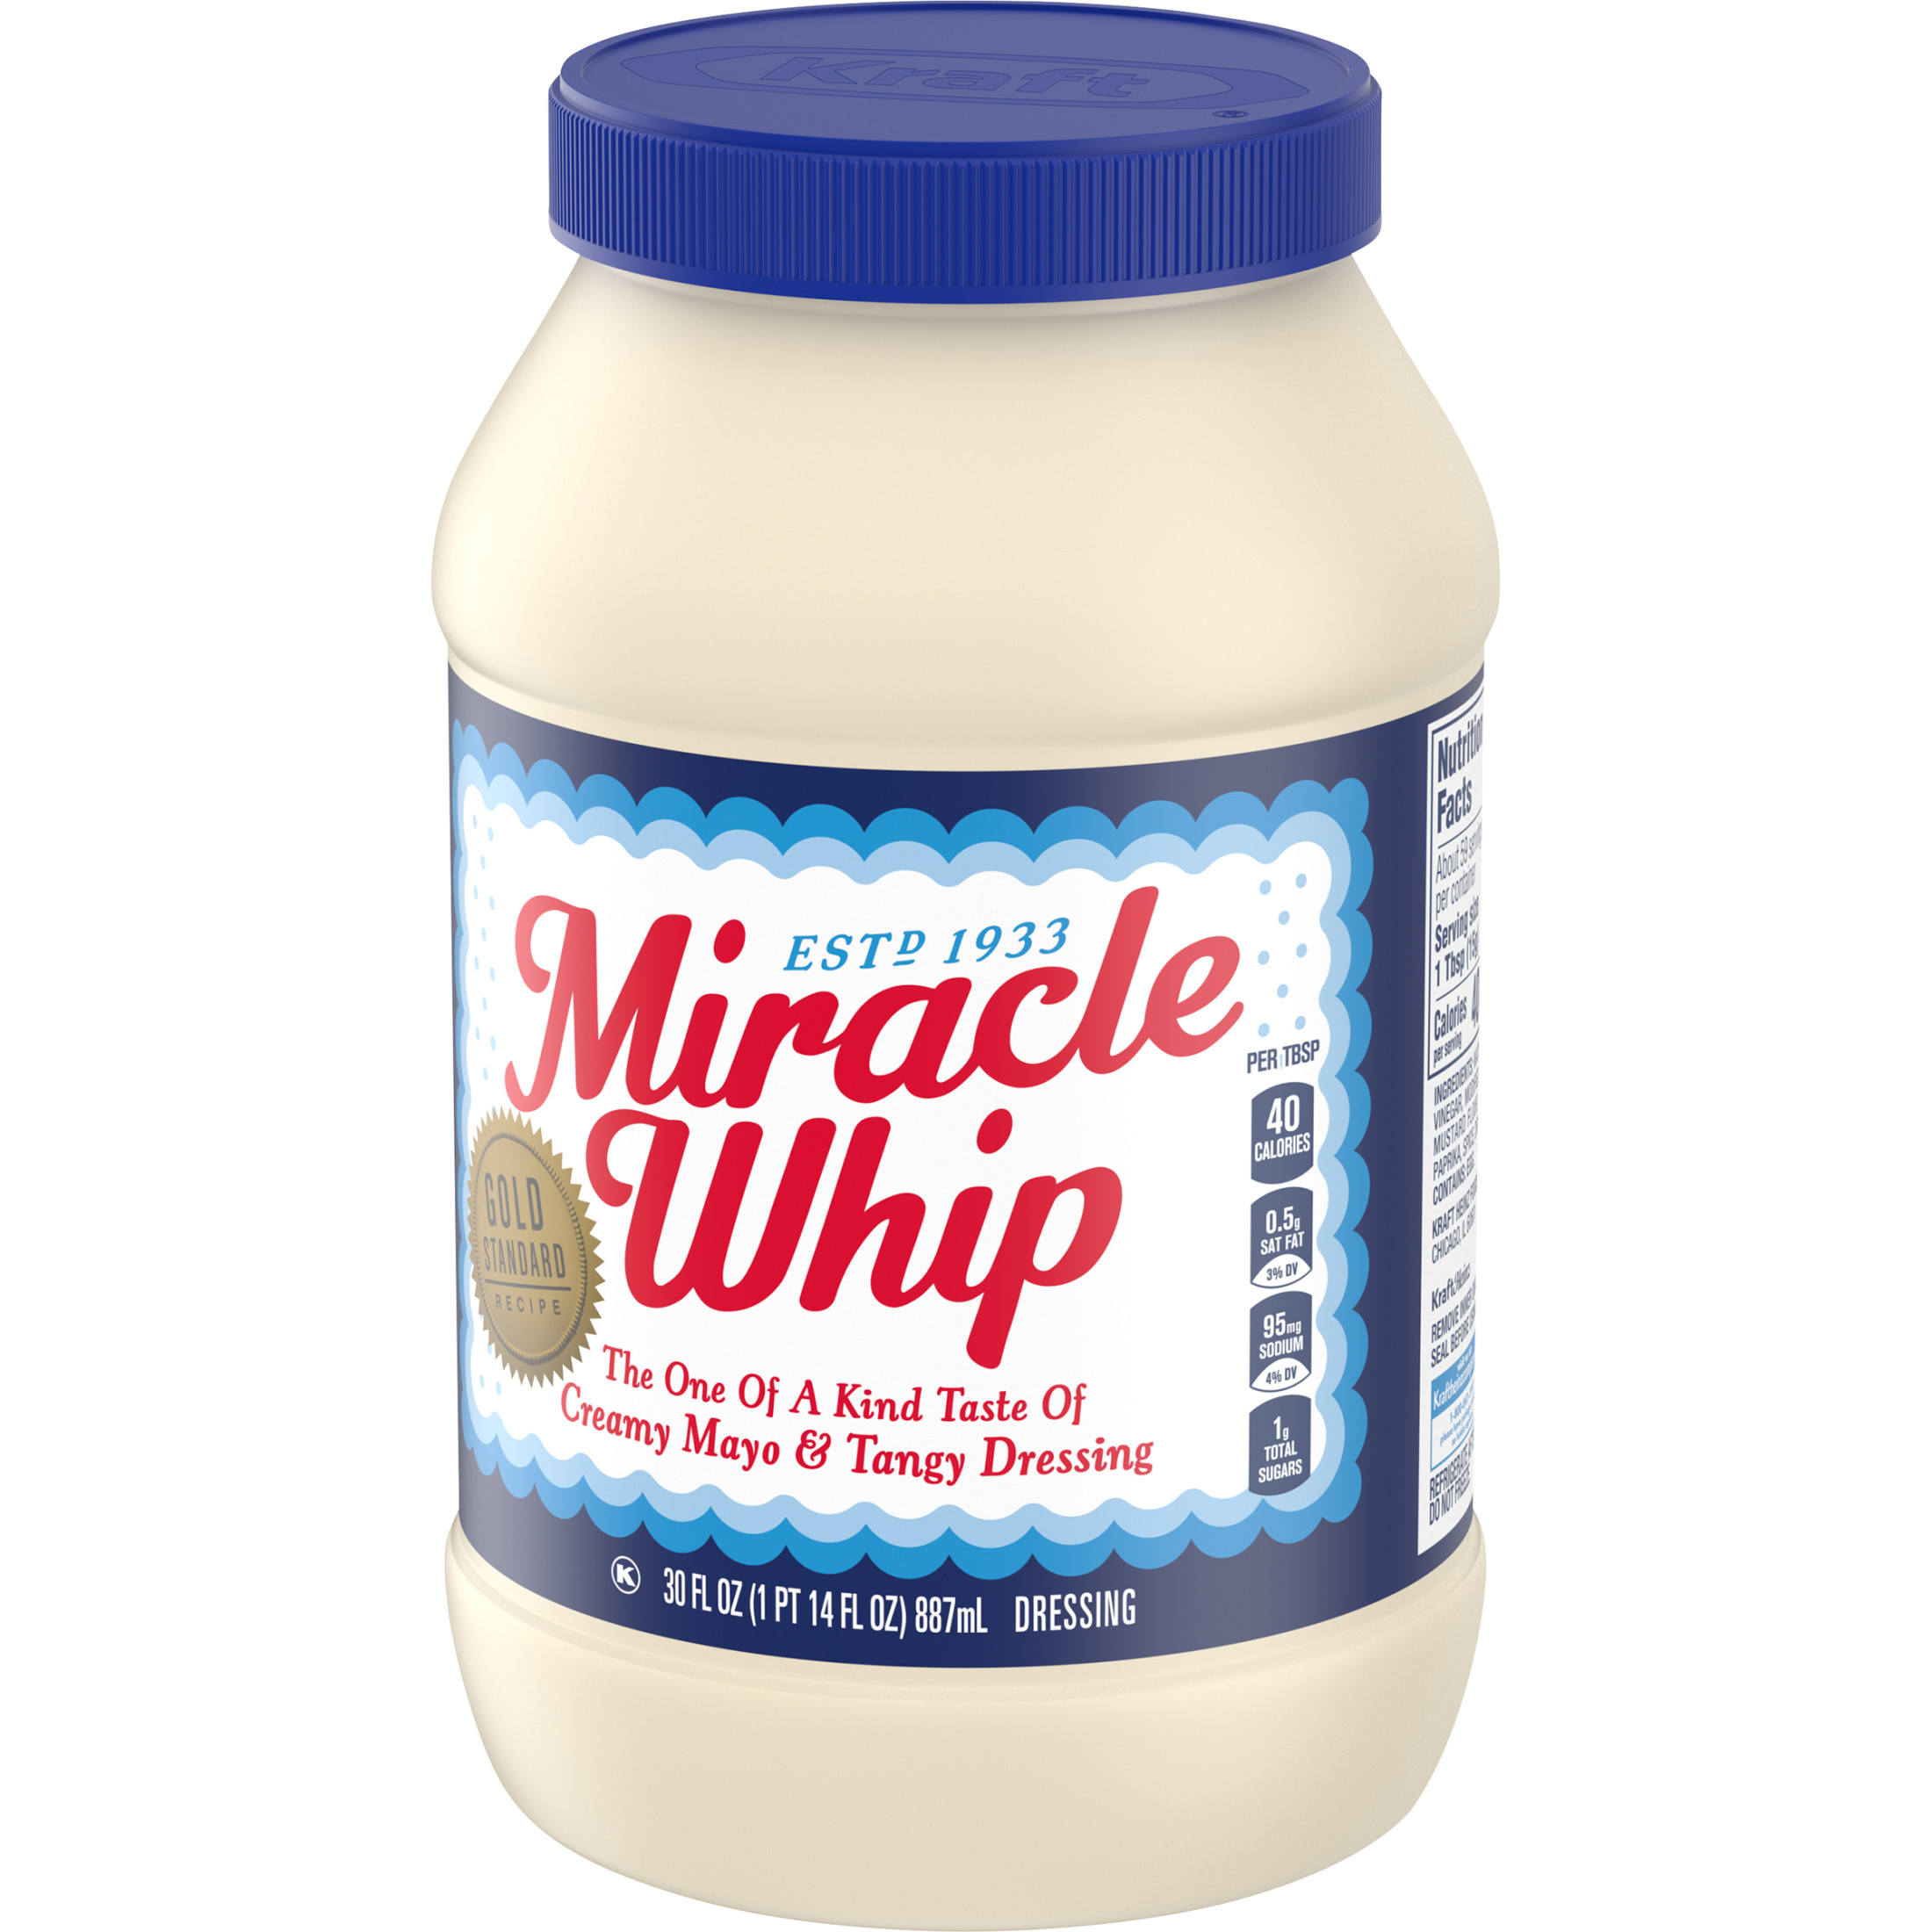 Miracle Whip Mayo-like Dressing, for a Keto and Low Carb Lifestyle, 30 fl oz Jar - image 14 of 16